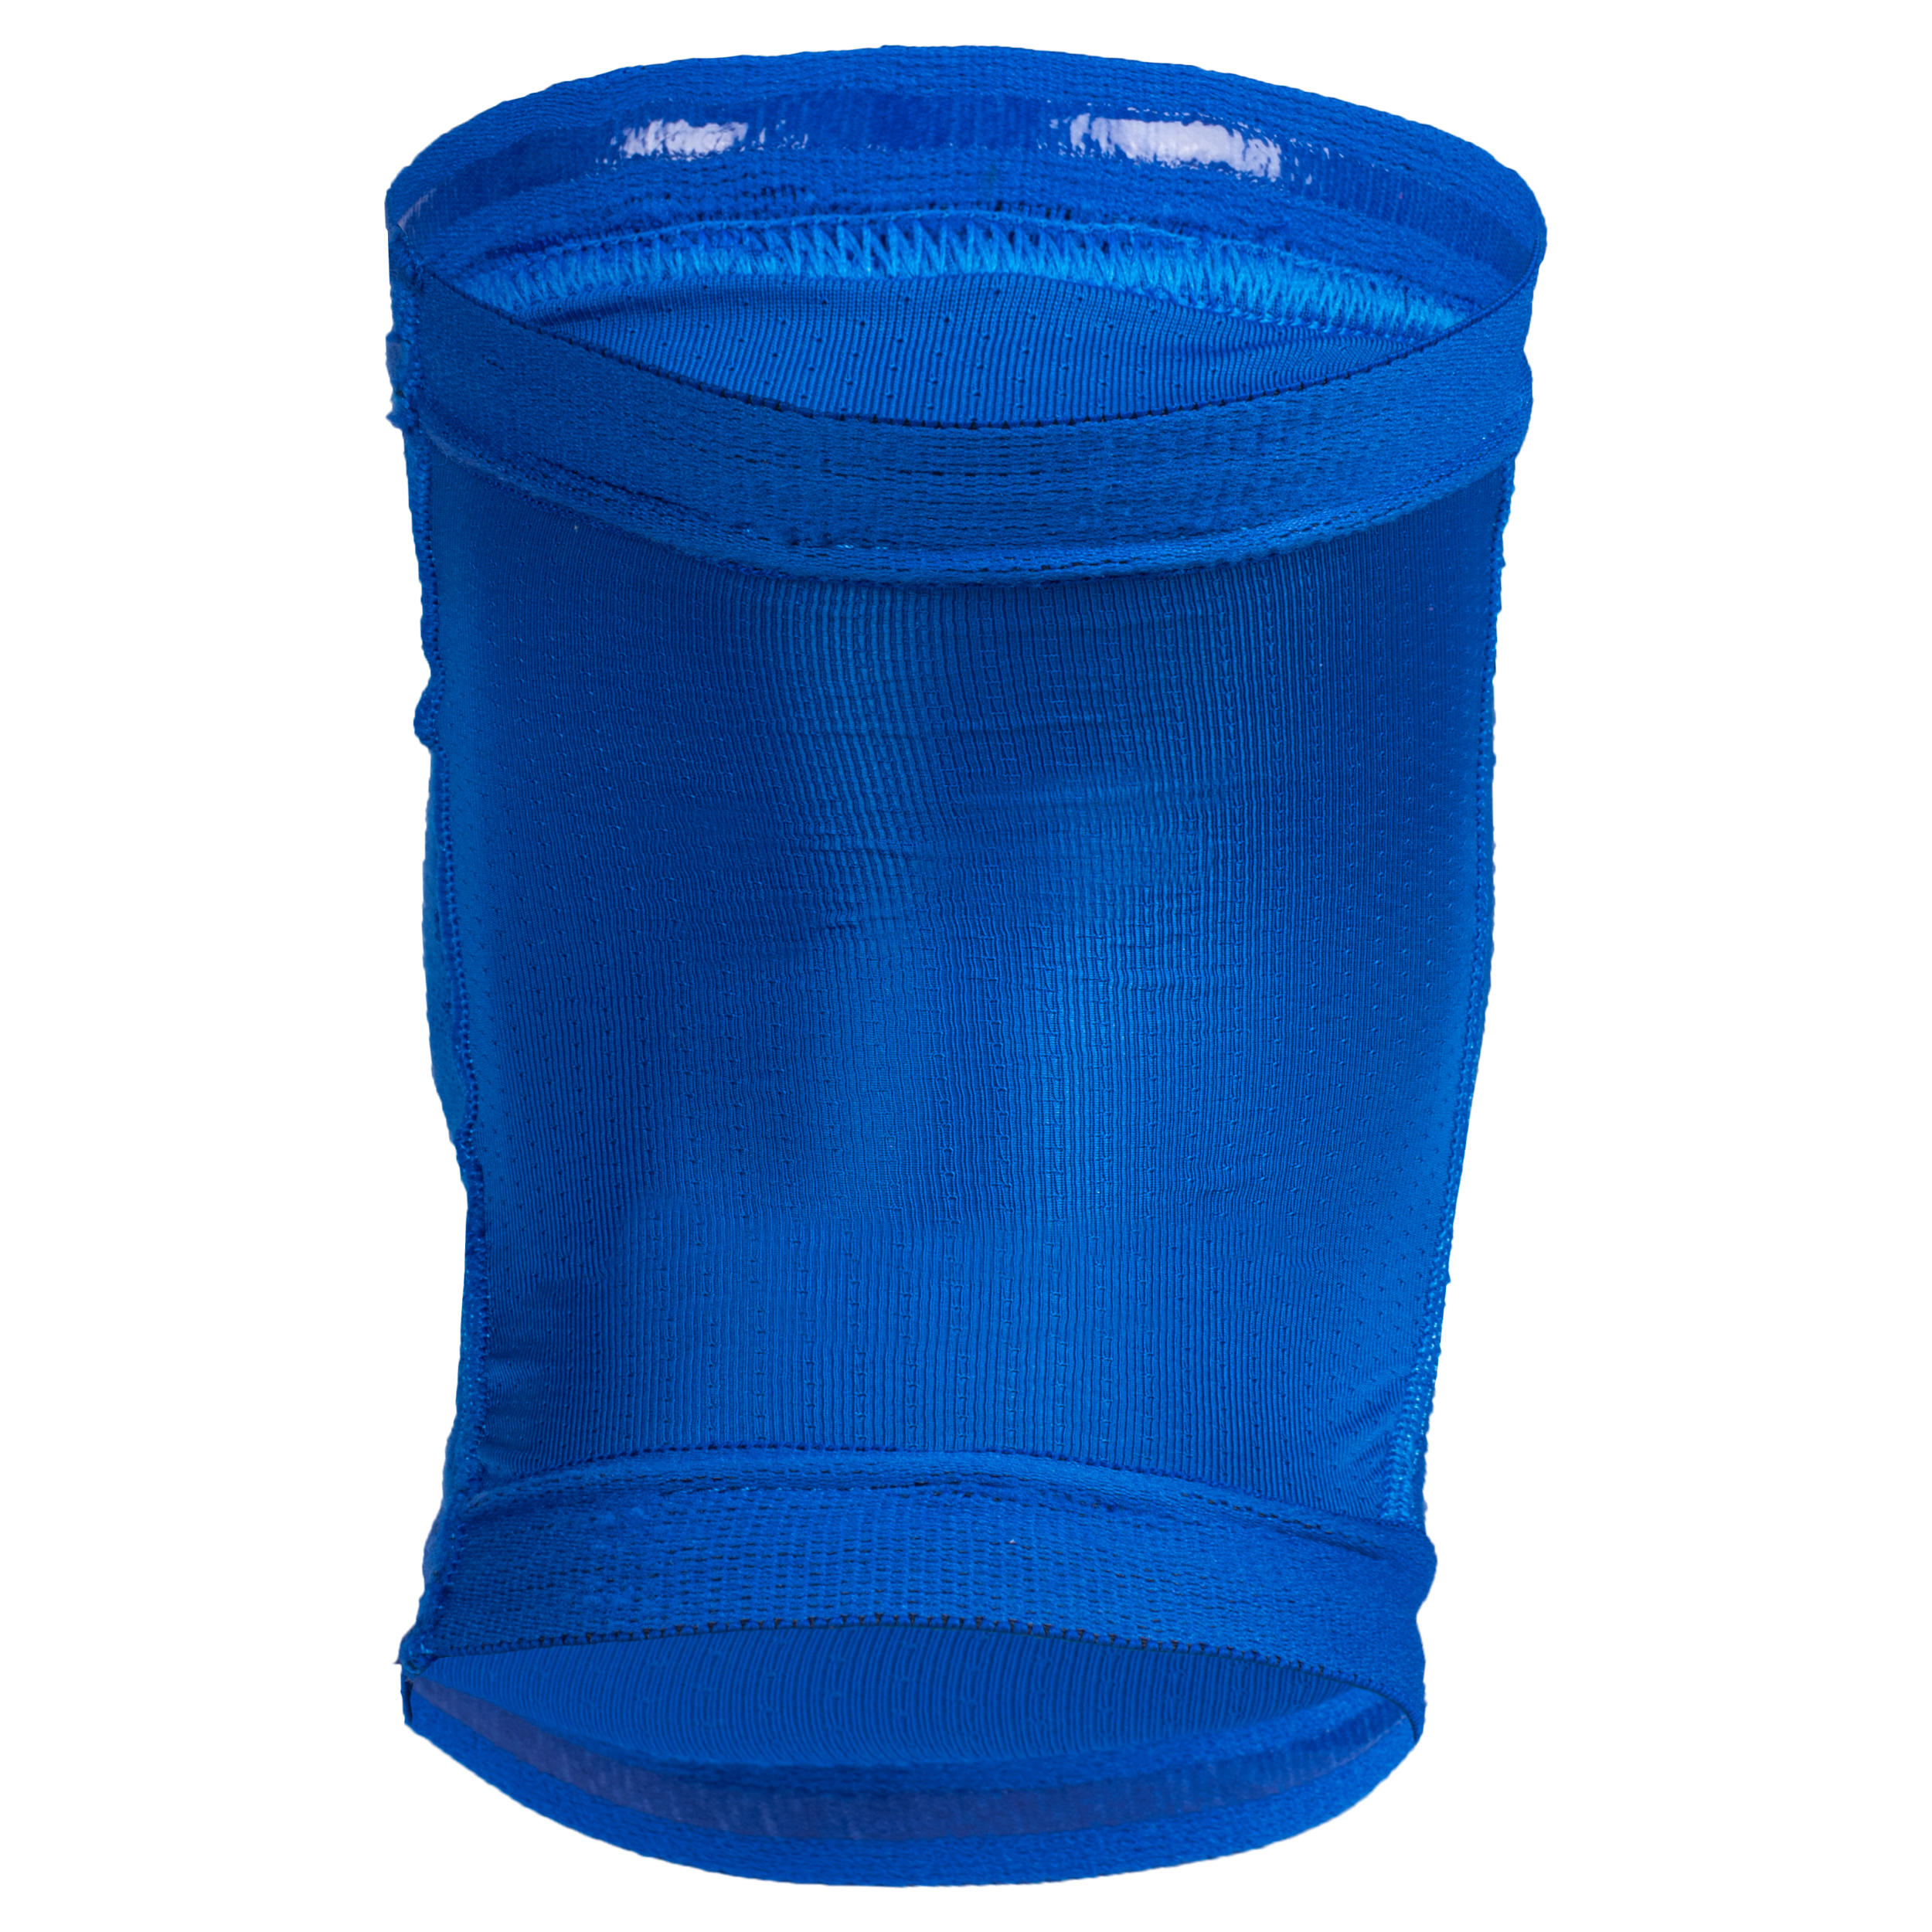 Volleyball Knee Pads VKP900 - Blue 4/5